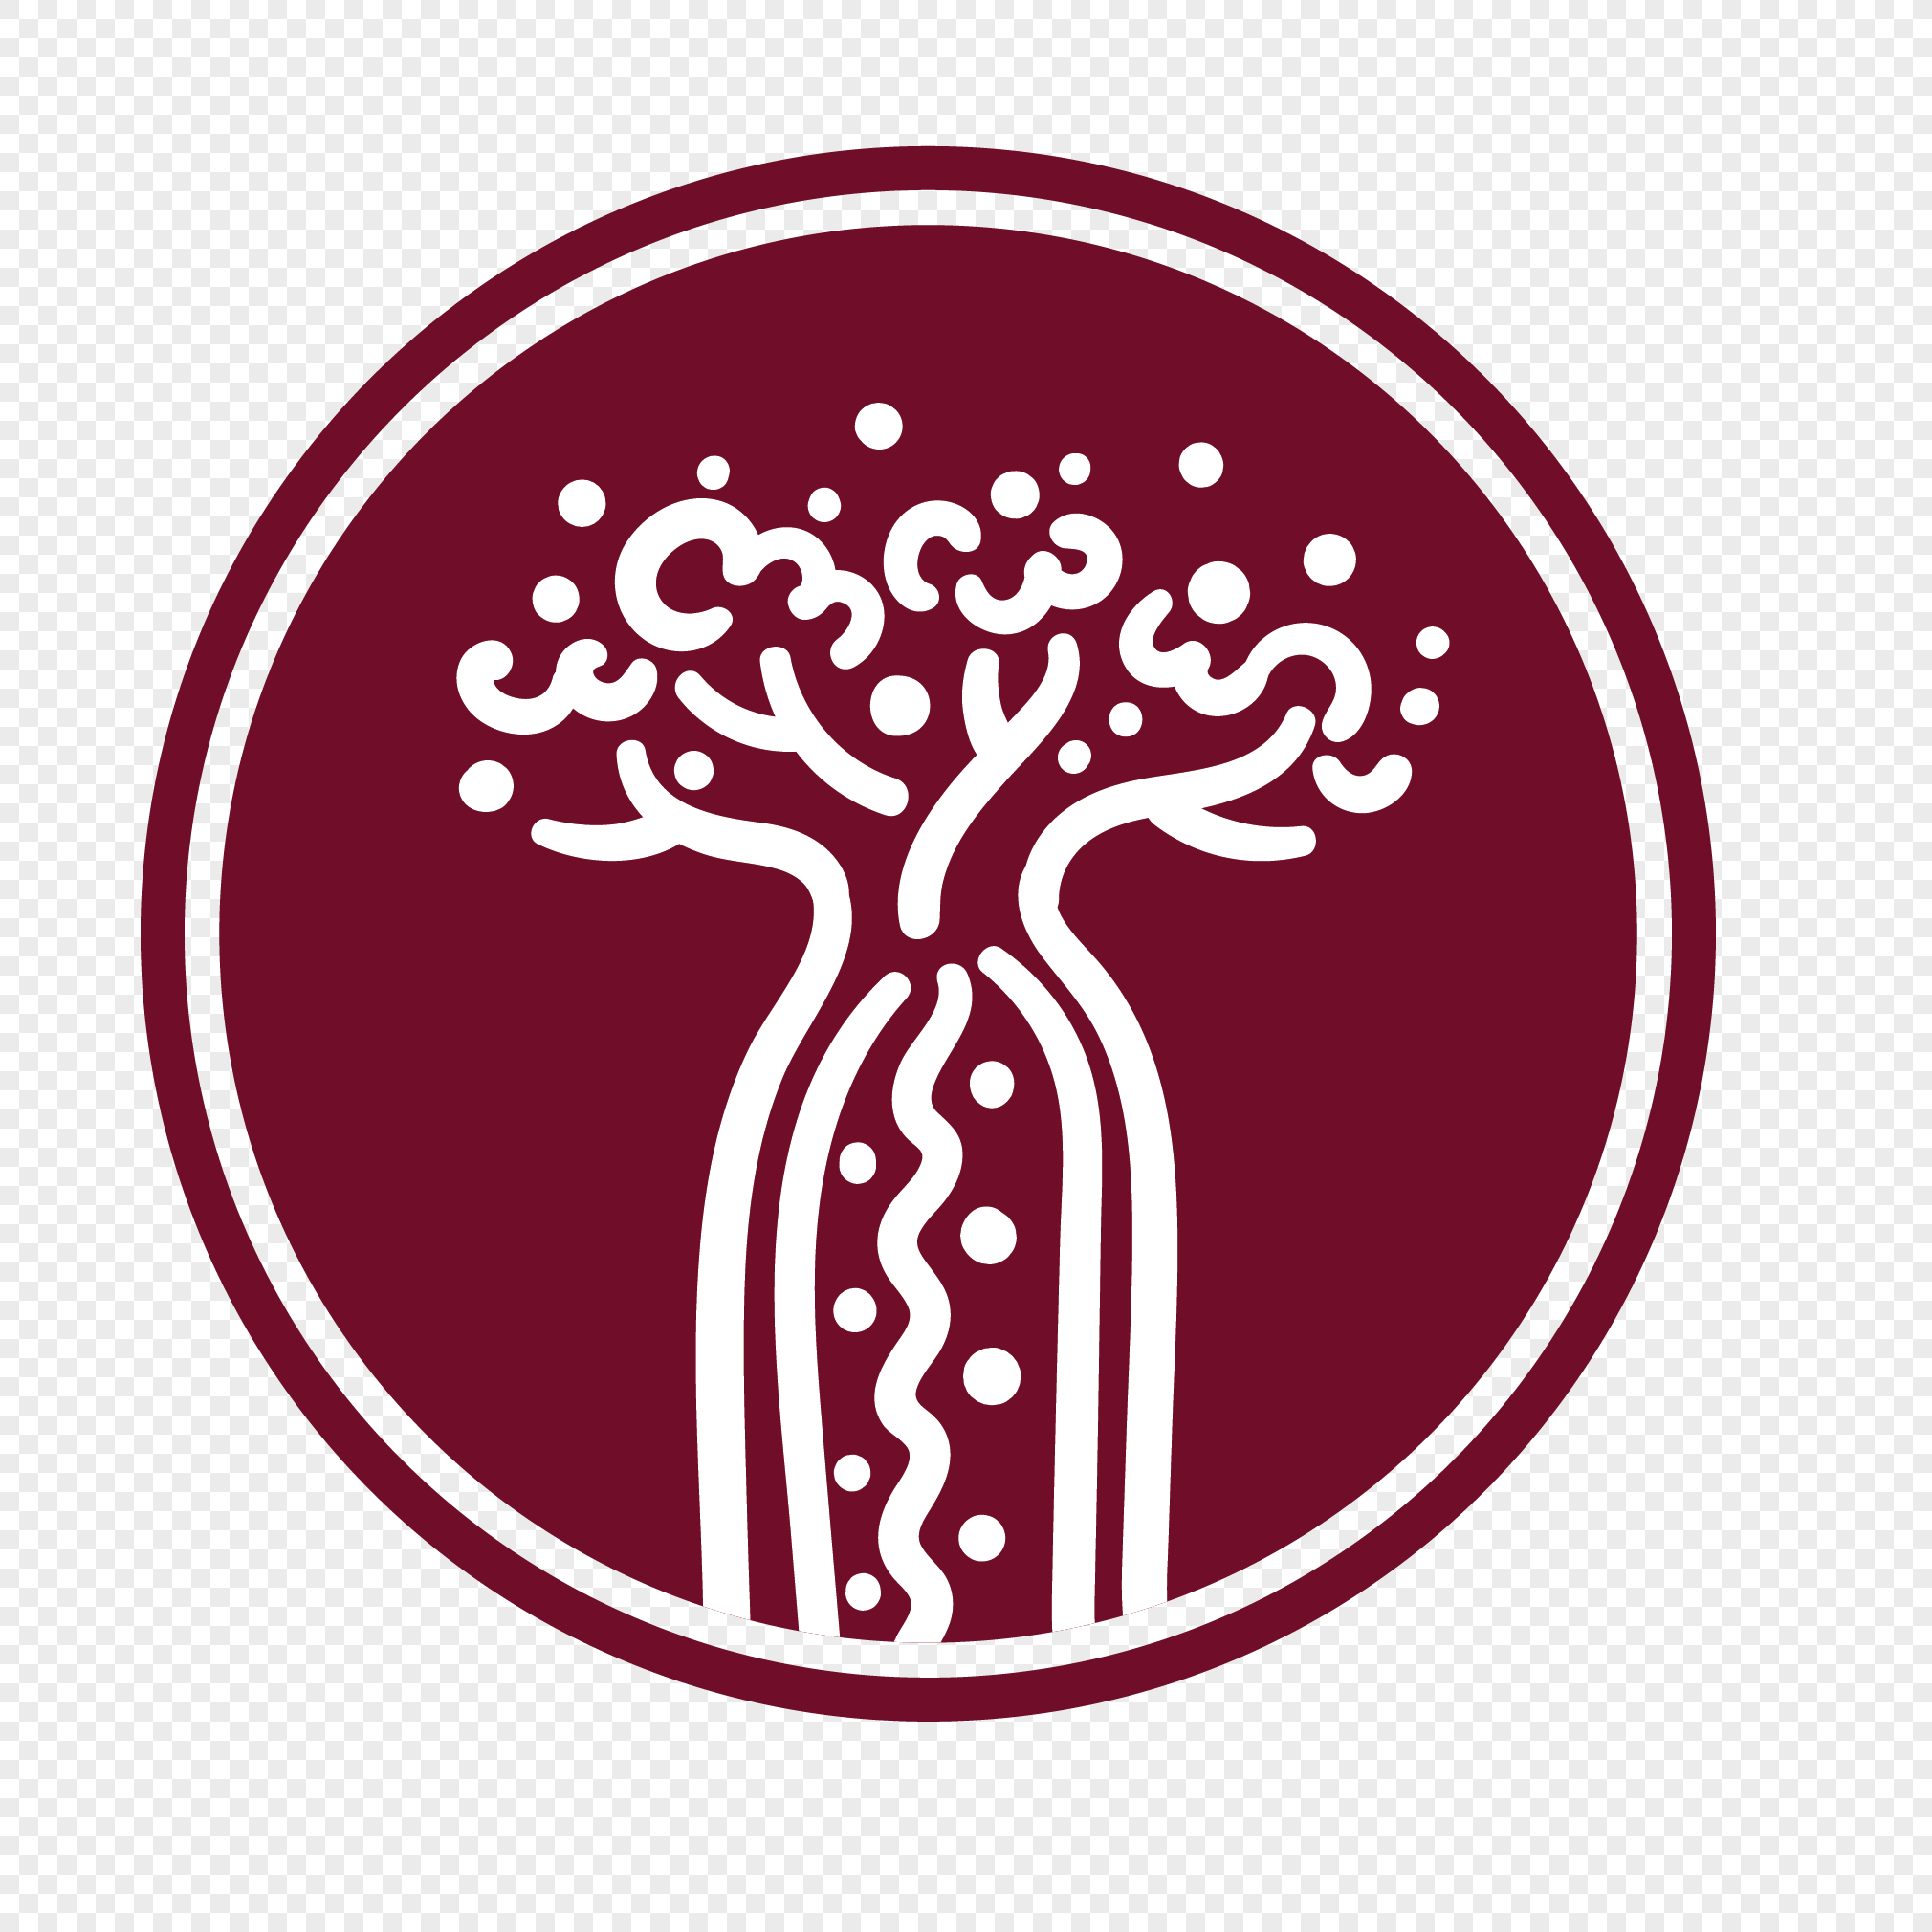 Red Tree Circle Logo - Red tree icon png image_picture free download 400569777_lovepik.com